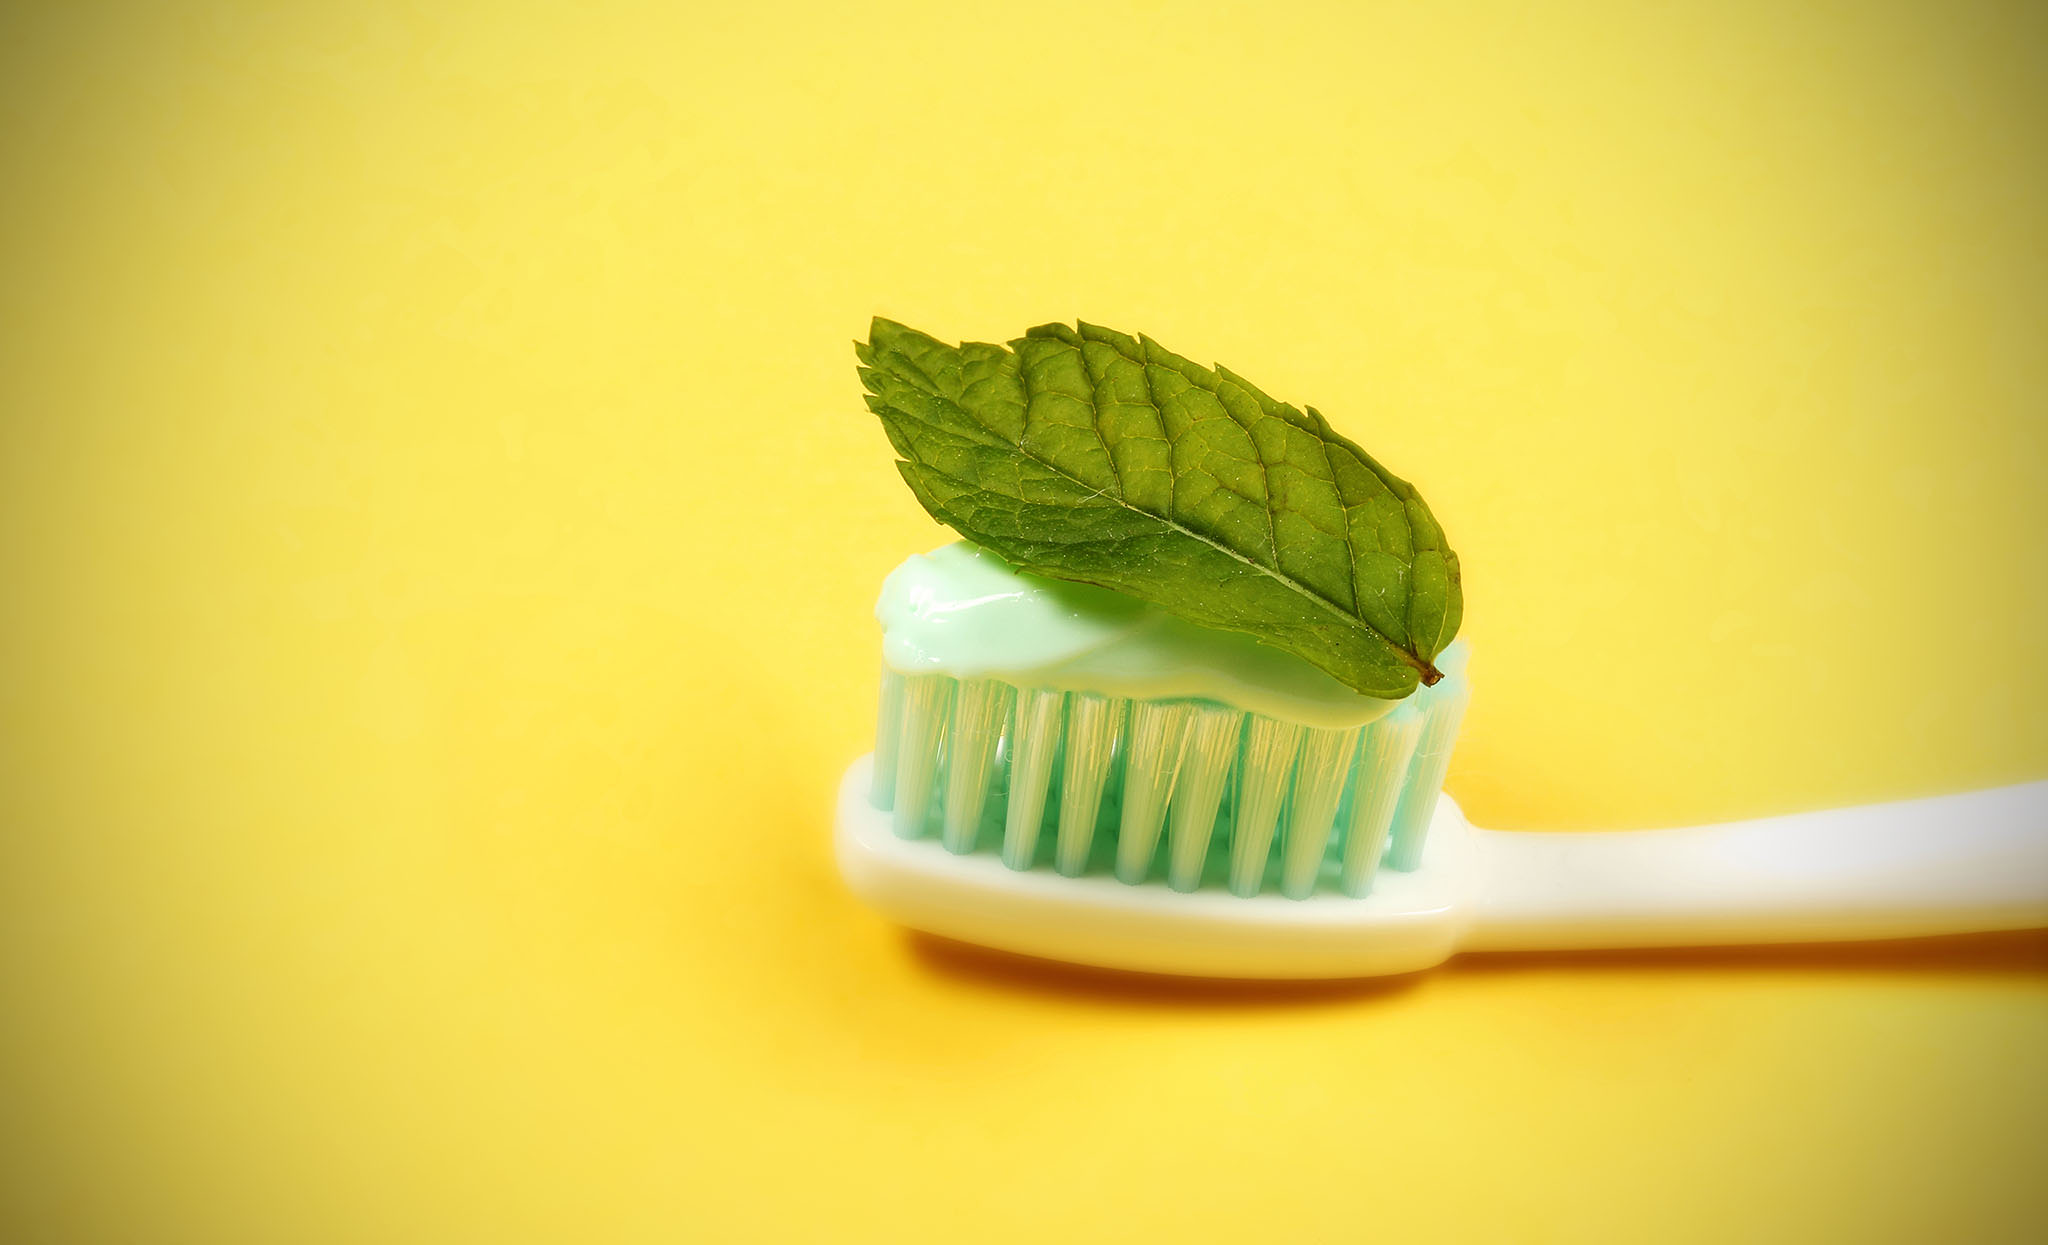 Tooth brush on a yellow background with a fresh mint leaf.